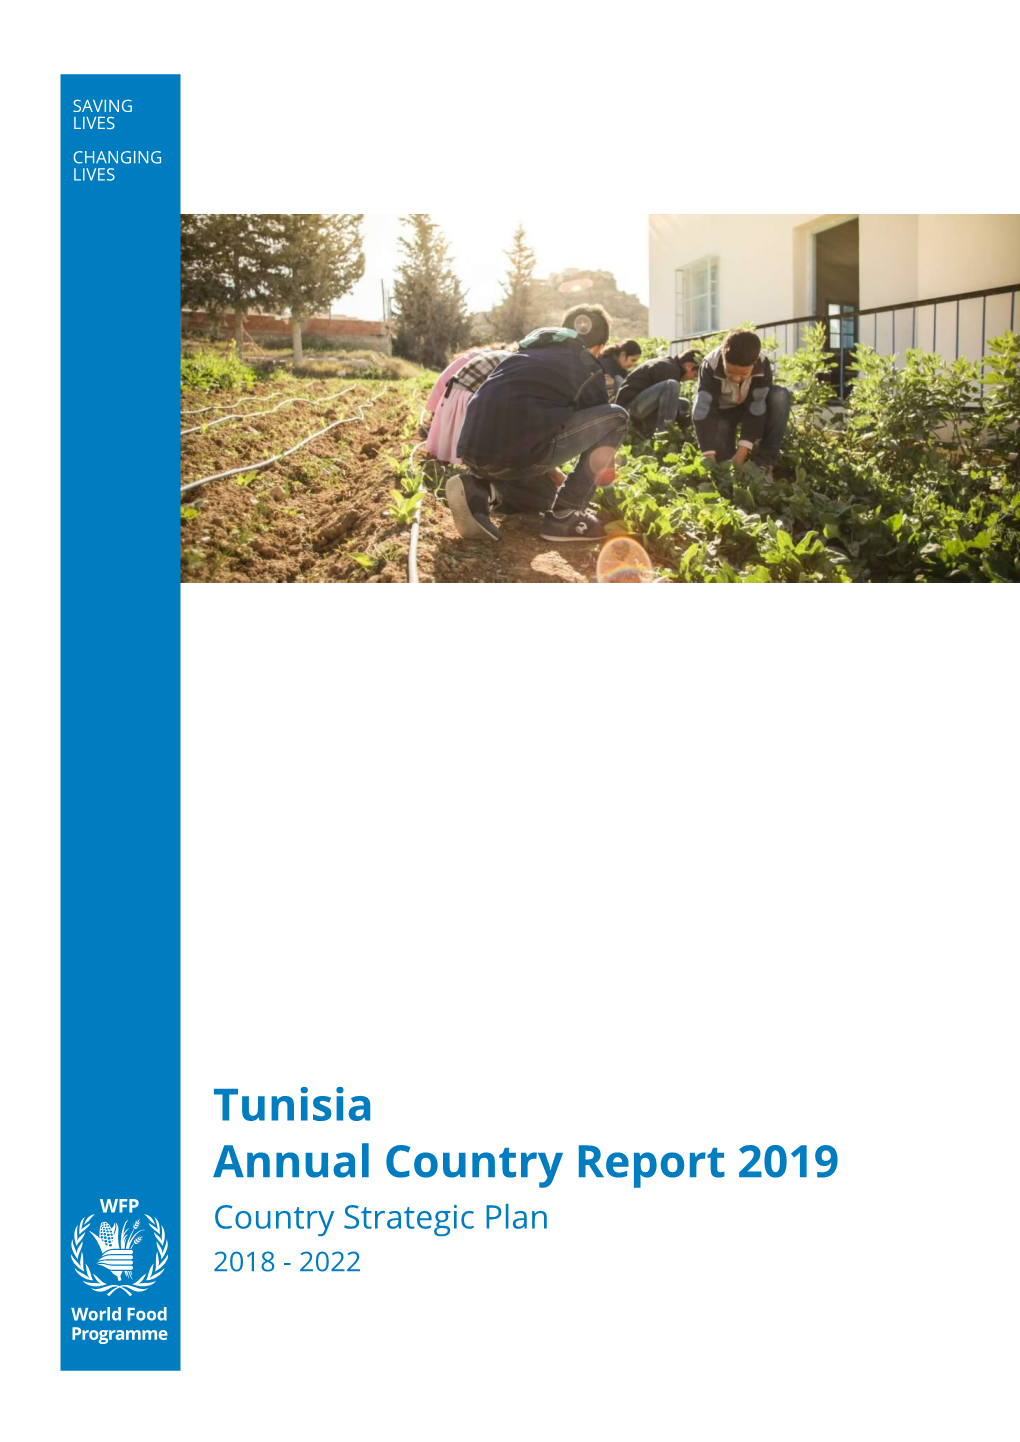 Tunisia Annual Country Report 2019 Country Strategic Plan 2018 - 2022 Table of Contents